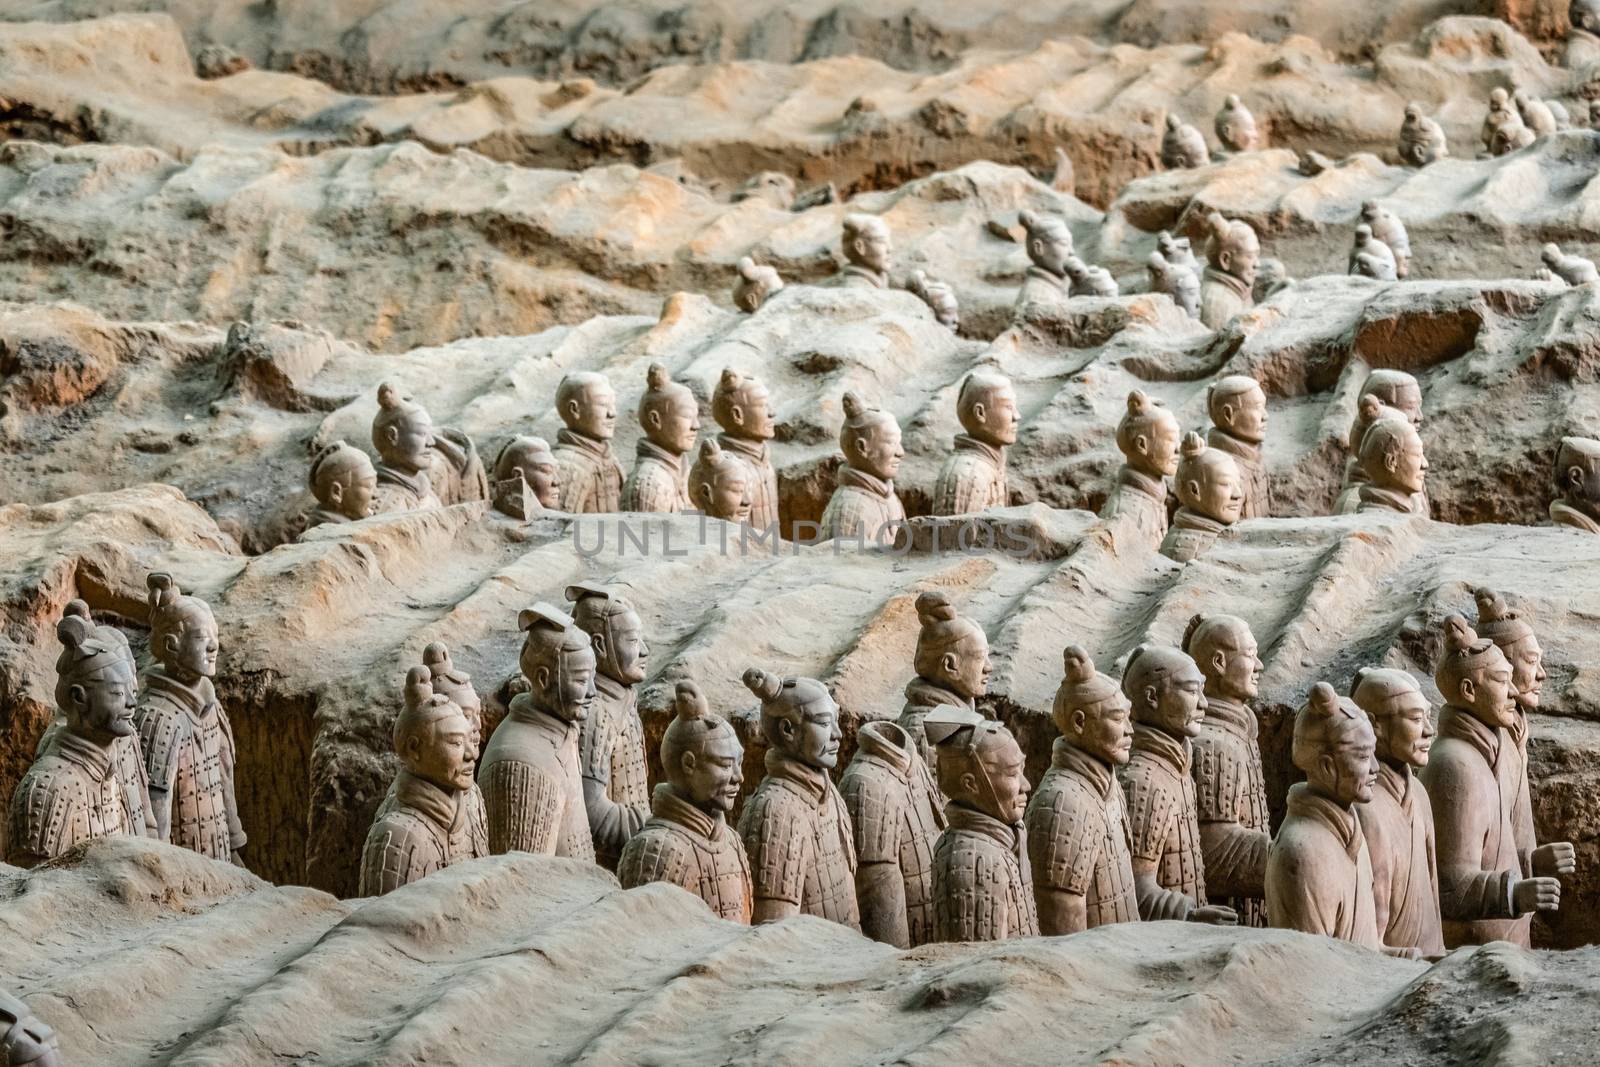 Excavated sculptures statues of the terracota army soldiers of Q by ambeon